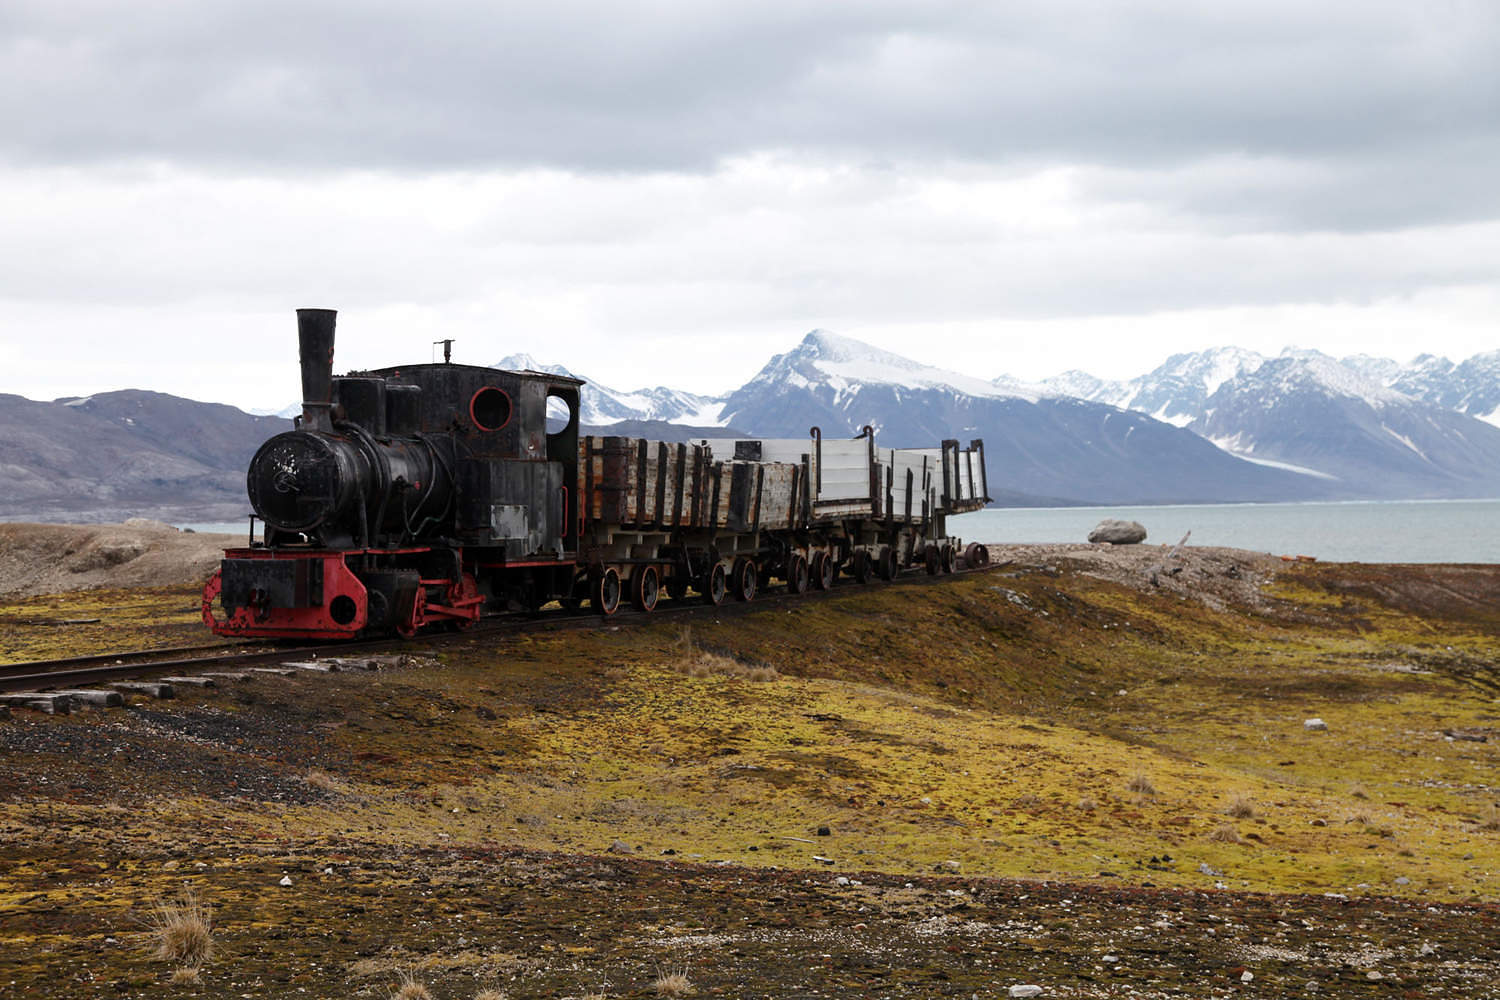 Coal trucks and locomotive preserved as a monument at Ny Alesund, Svalbard, Norway, Scandinavia, Europe